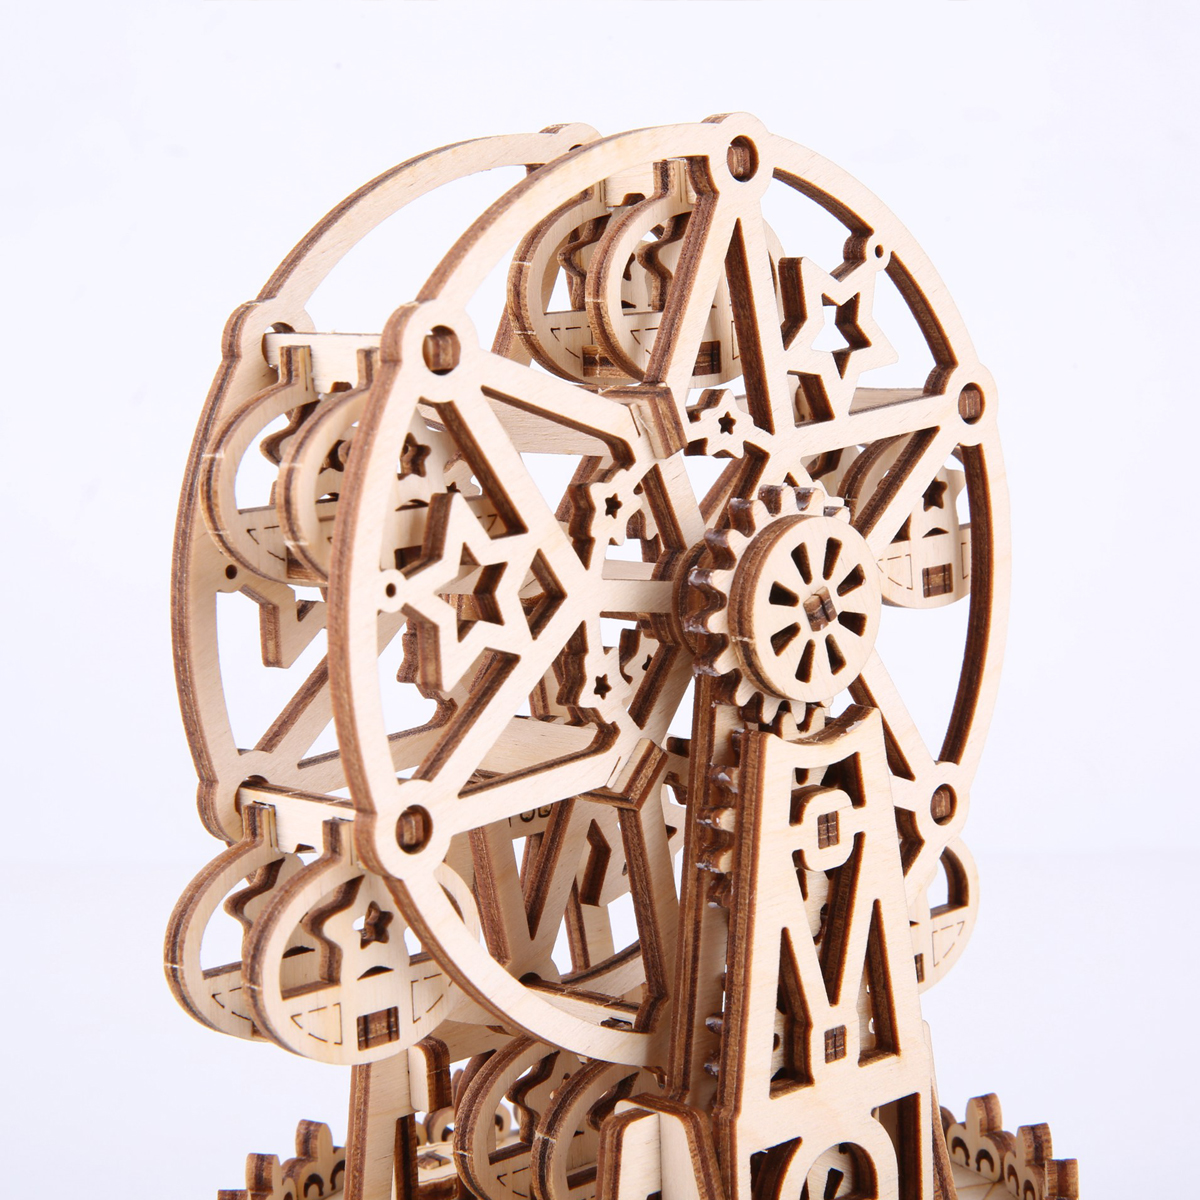 3D-Wooden-Ferris-Wheel-Puzzle-Music-Box-DIY-Assembly-Toys-Creative-Gift-1648686-6